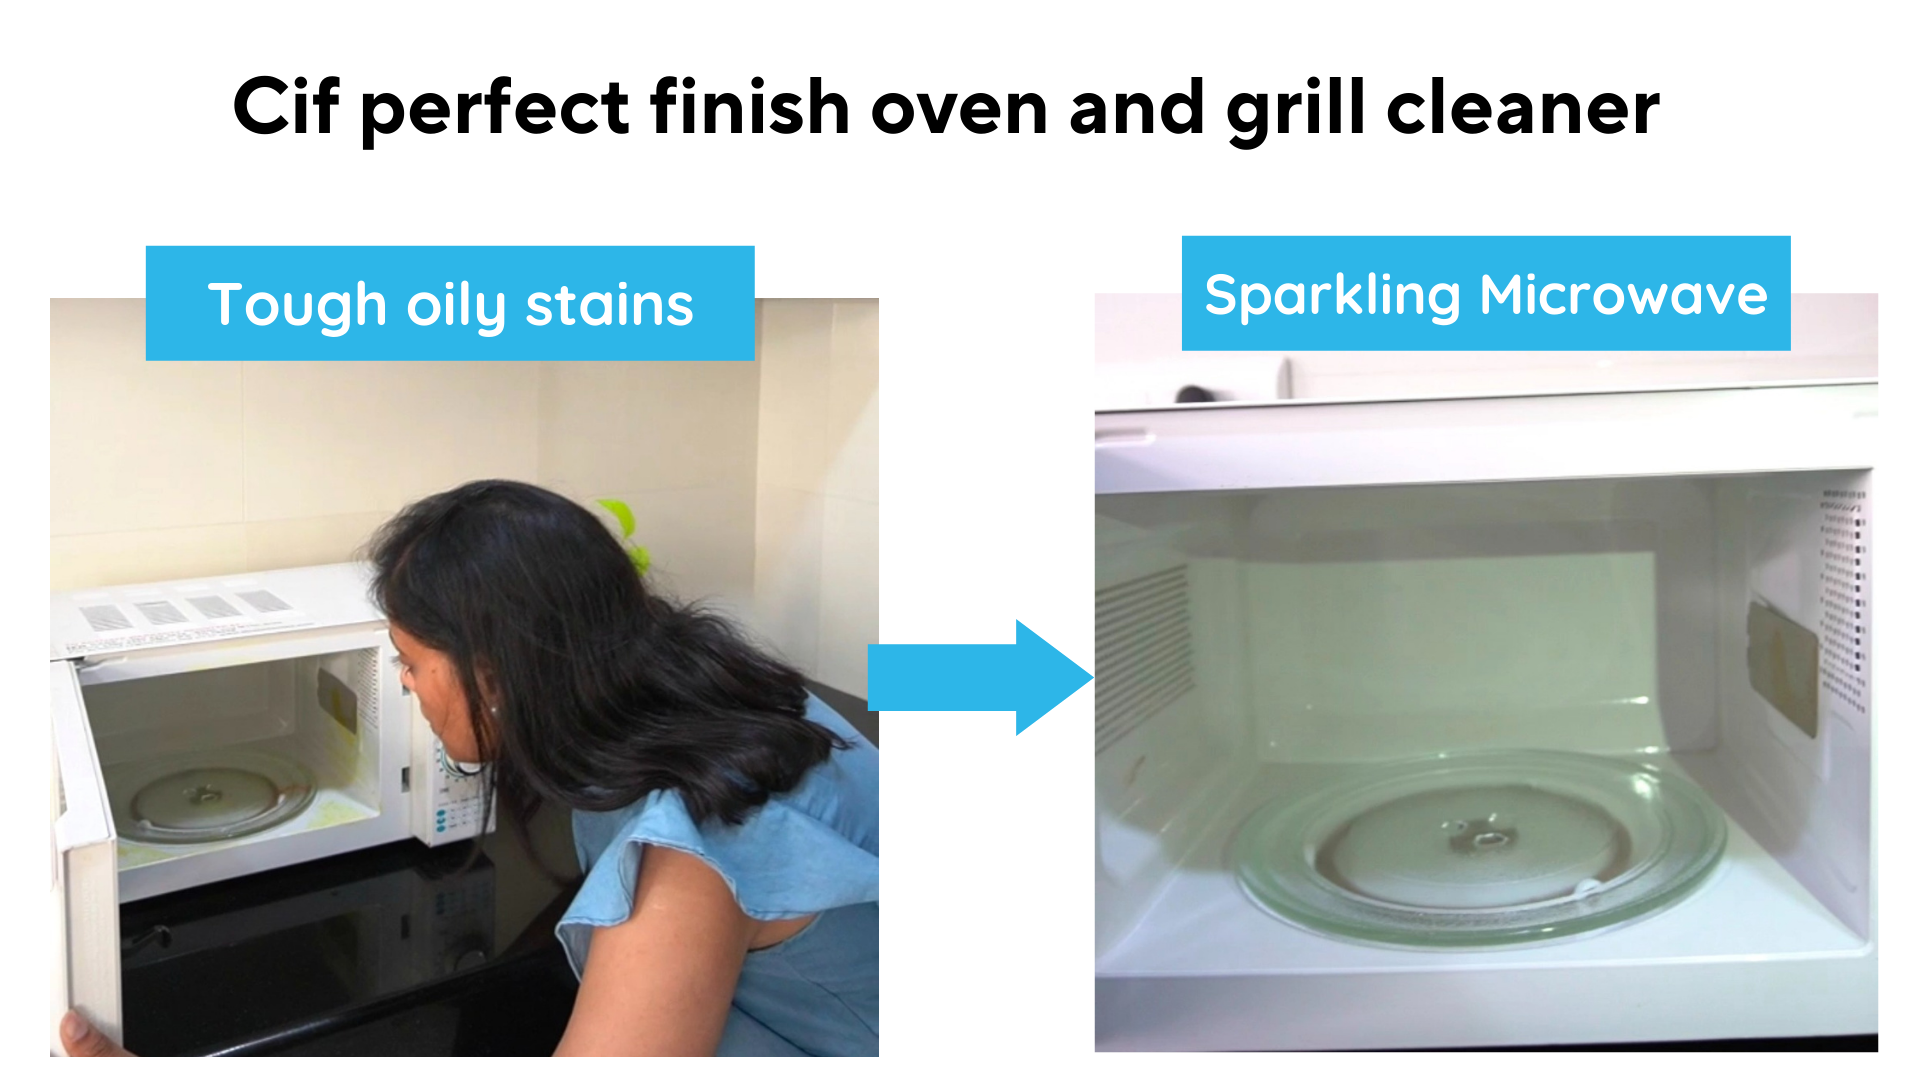 How to clean microwave grills and plates? #Cif #microwavecleaner #cakerecipe